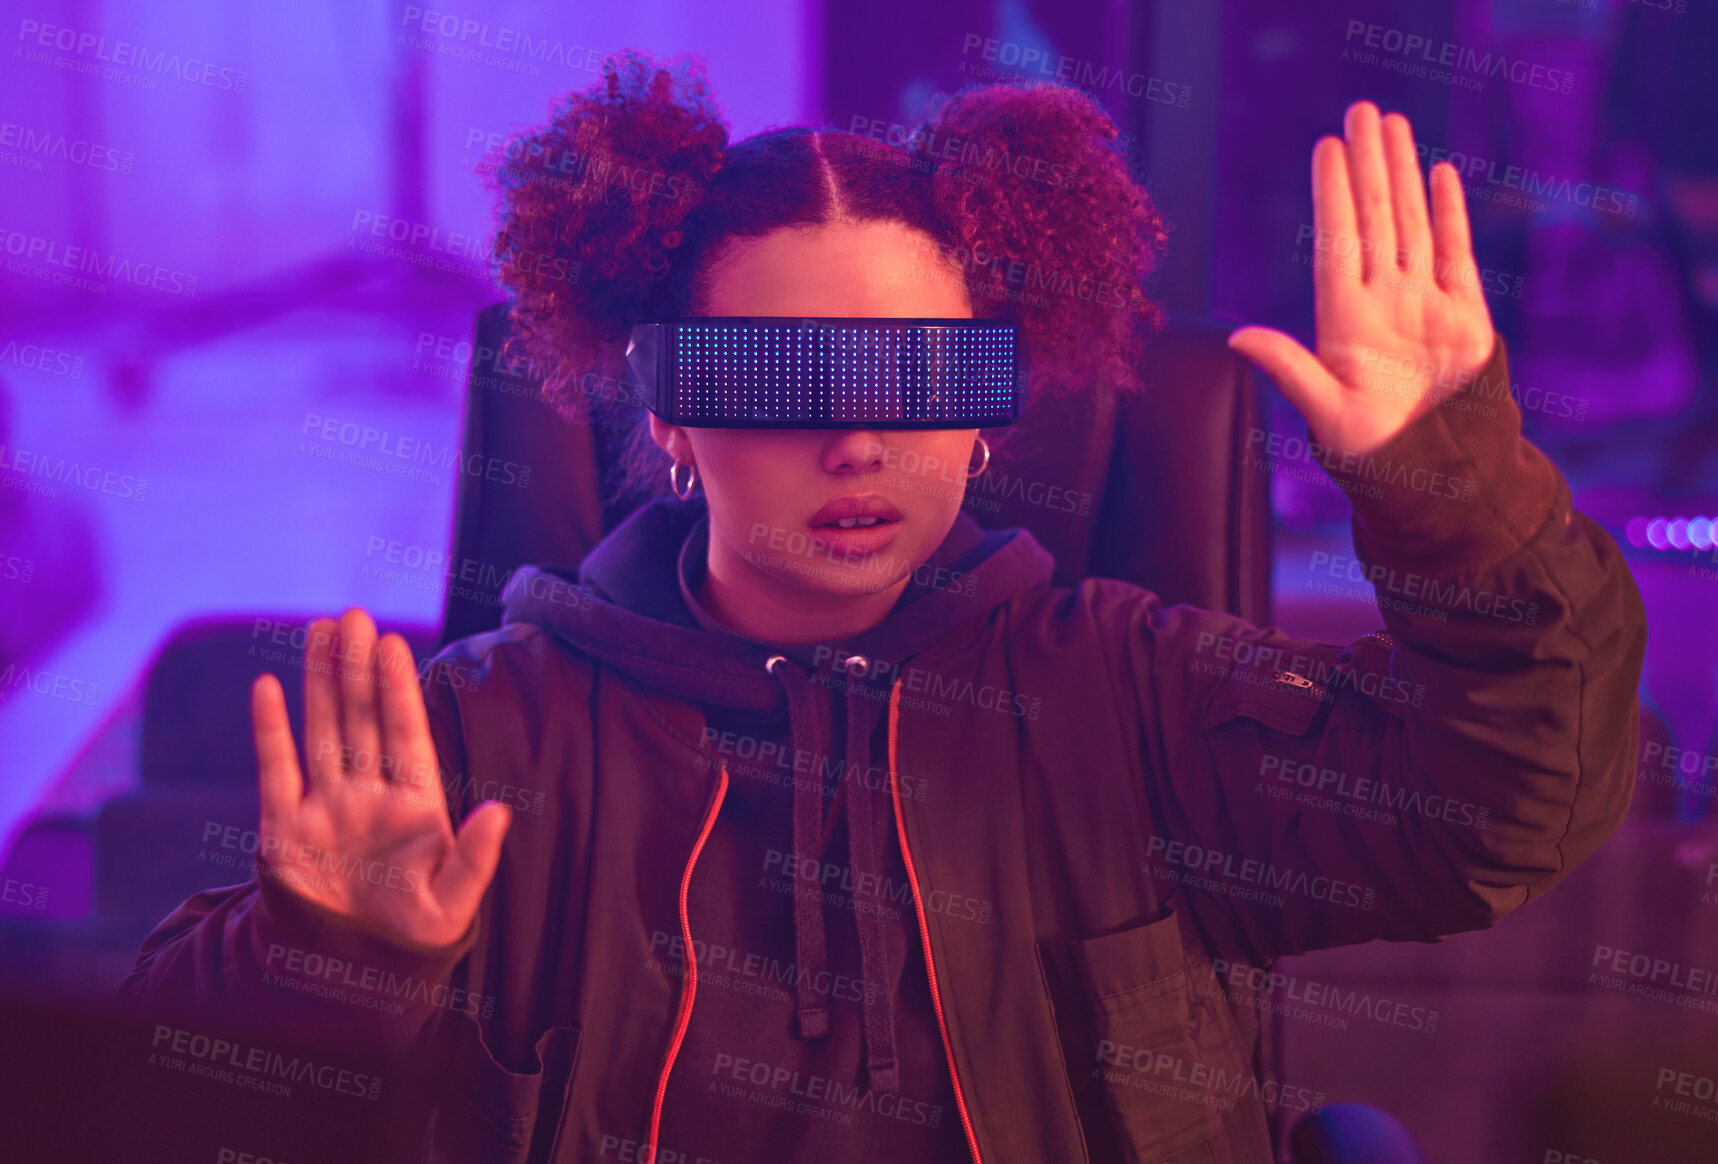 Buy stock photo Virtual reality glasses, hands and black woman in metaverse for futuristic gaming in purple room. Gamer person with ar tech for 3d, vr and cyber world experience streaming online digital fantasy game